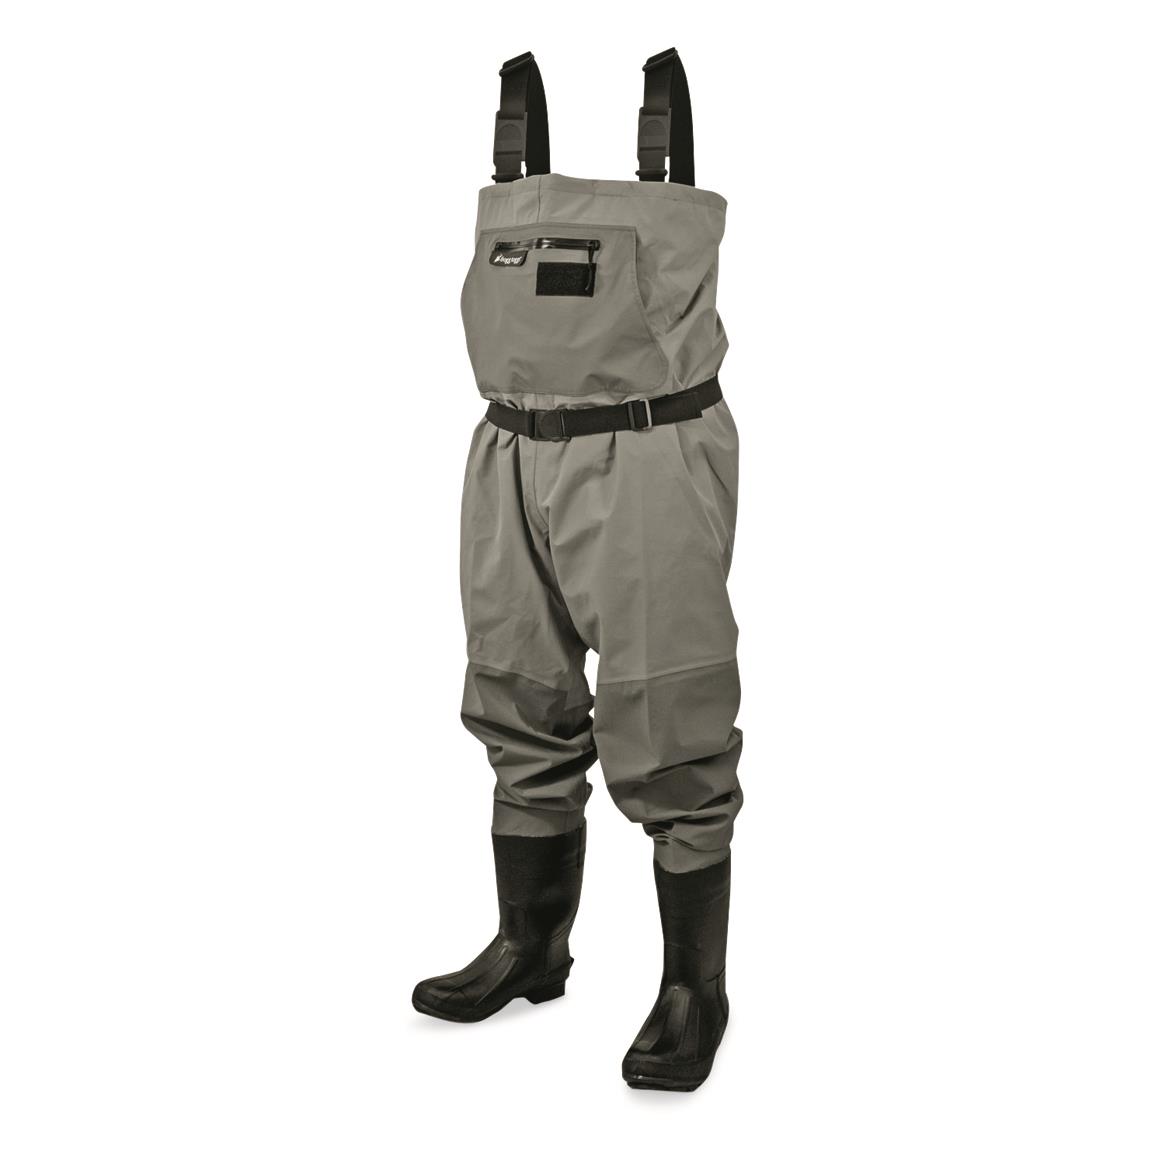 Frogg Toggs Hellbender Pro Cleated Bootfoot Chest Waders, Slate/Gray